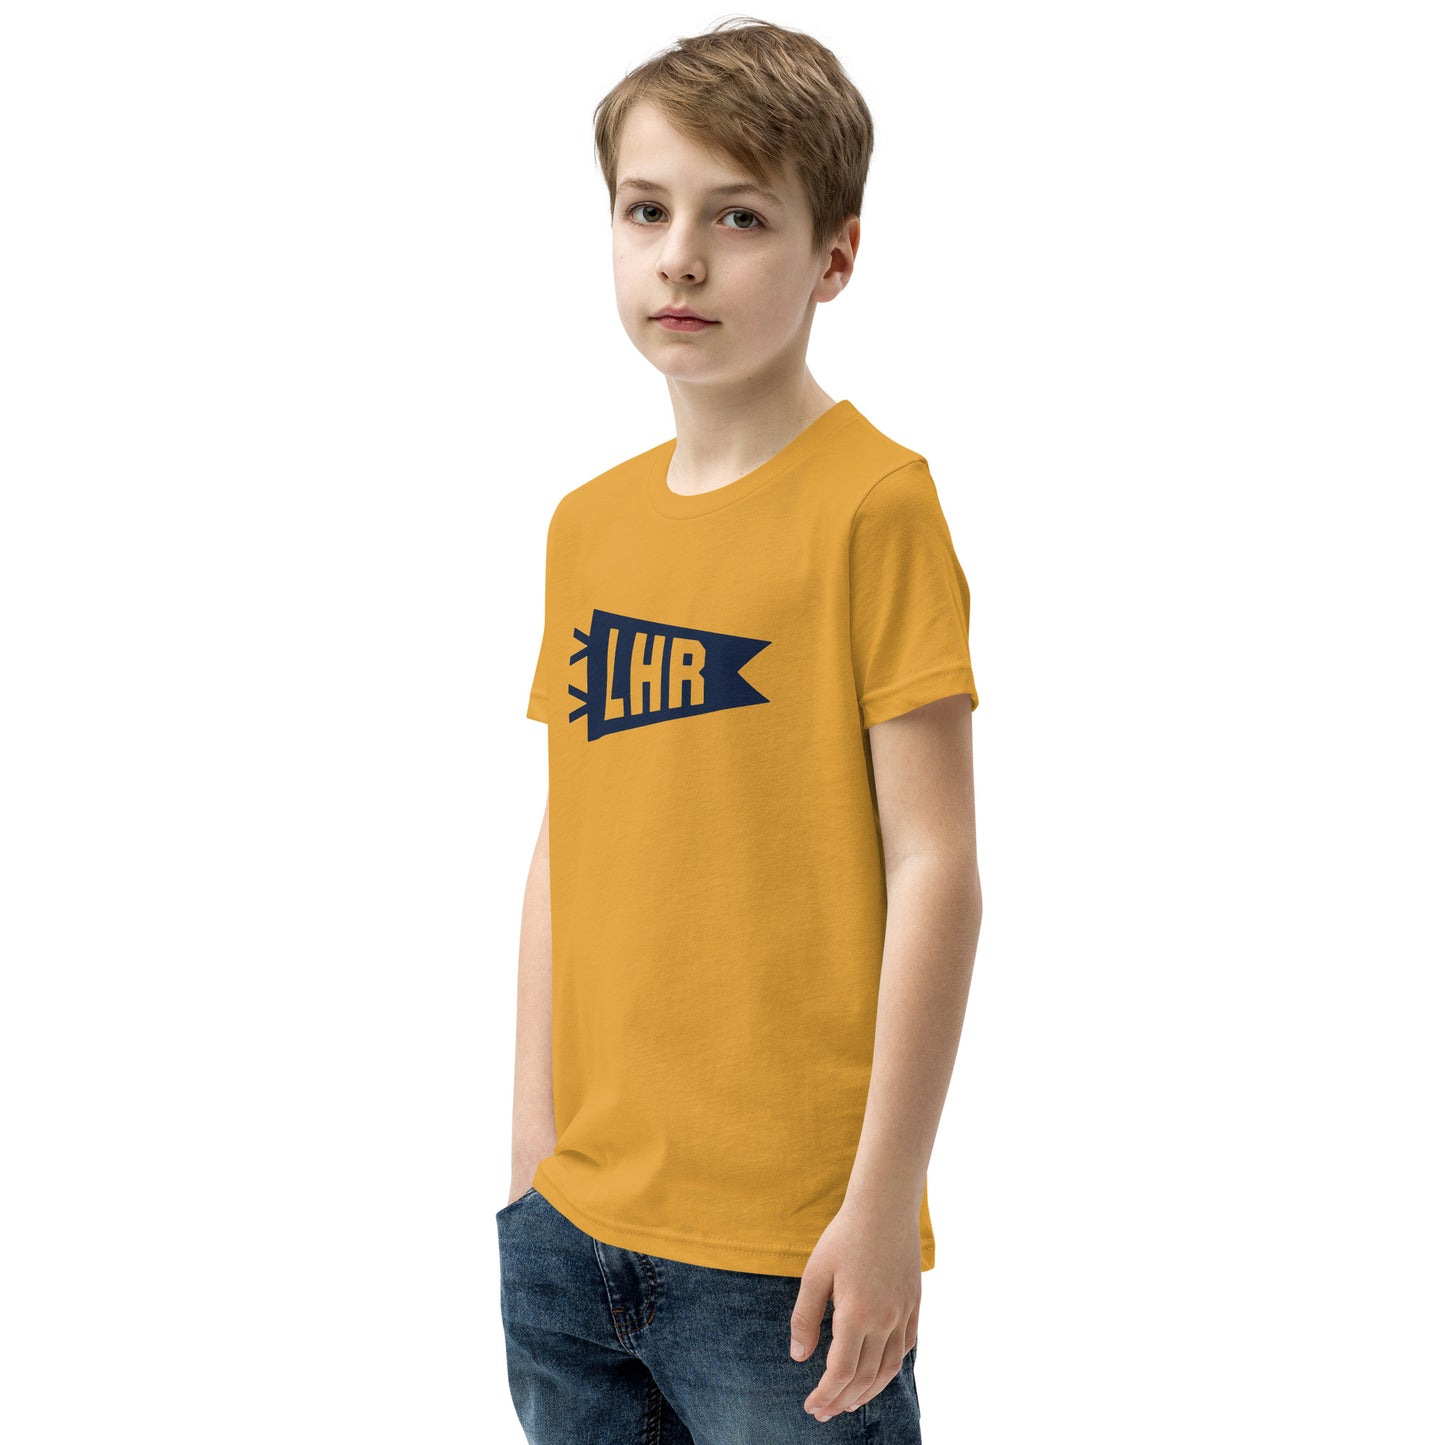 Kid's Airport Code Tee - Navy Blue Graphic • LHR London • YHM Designs - Image 06